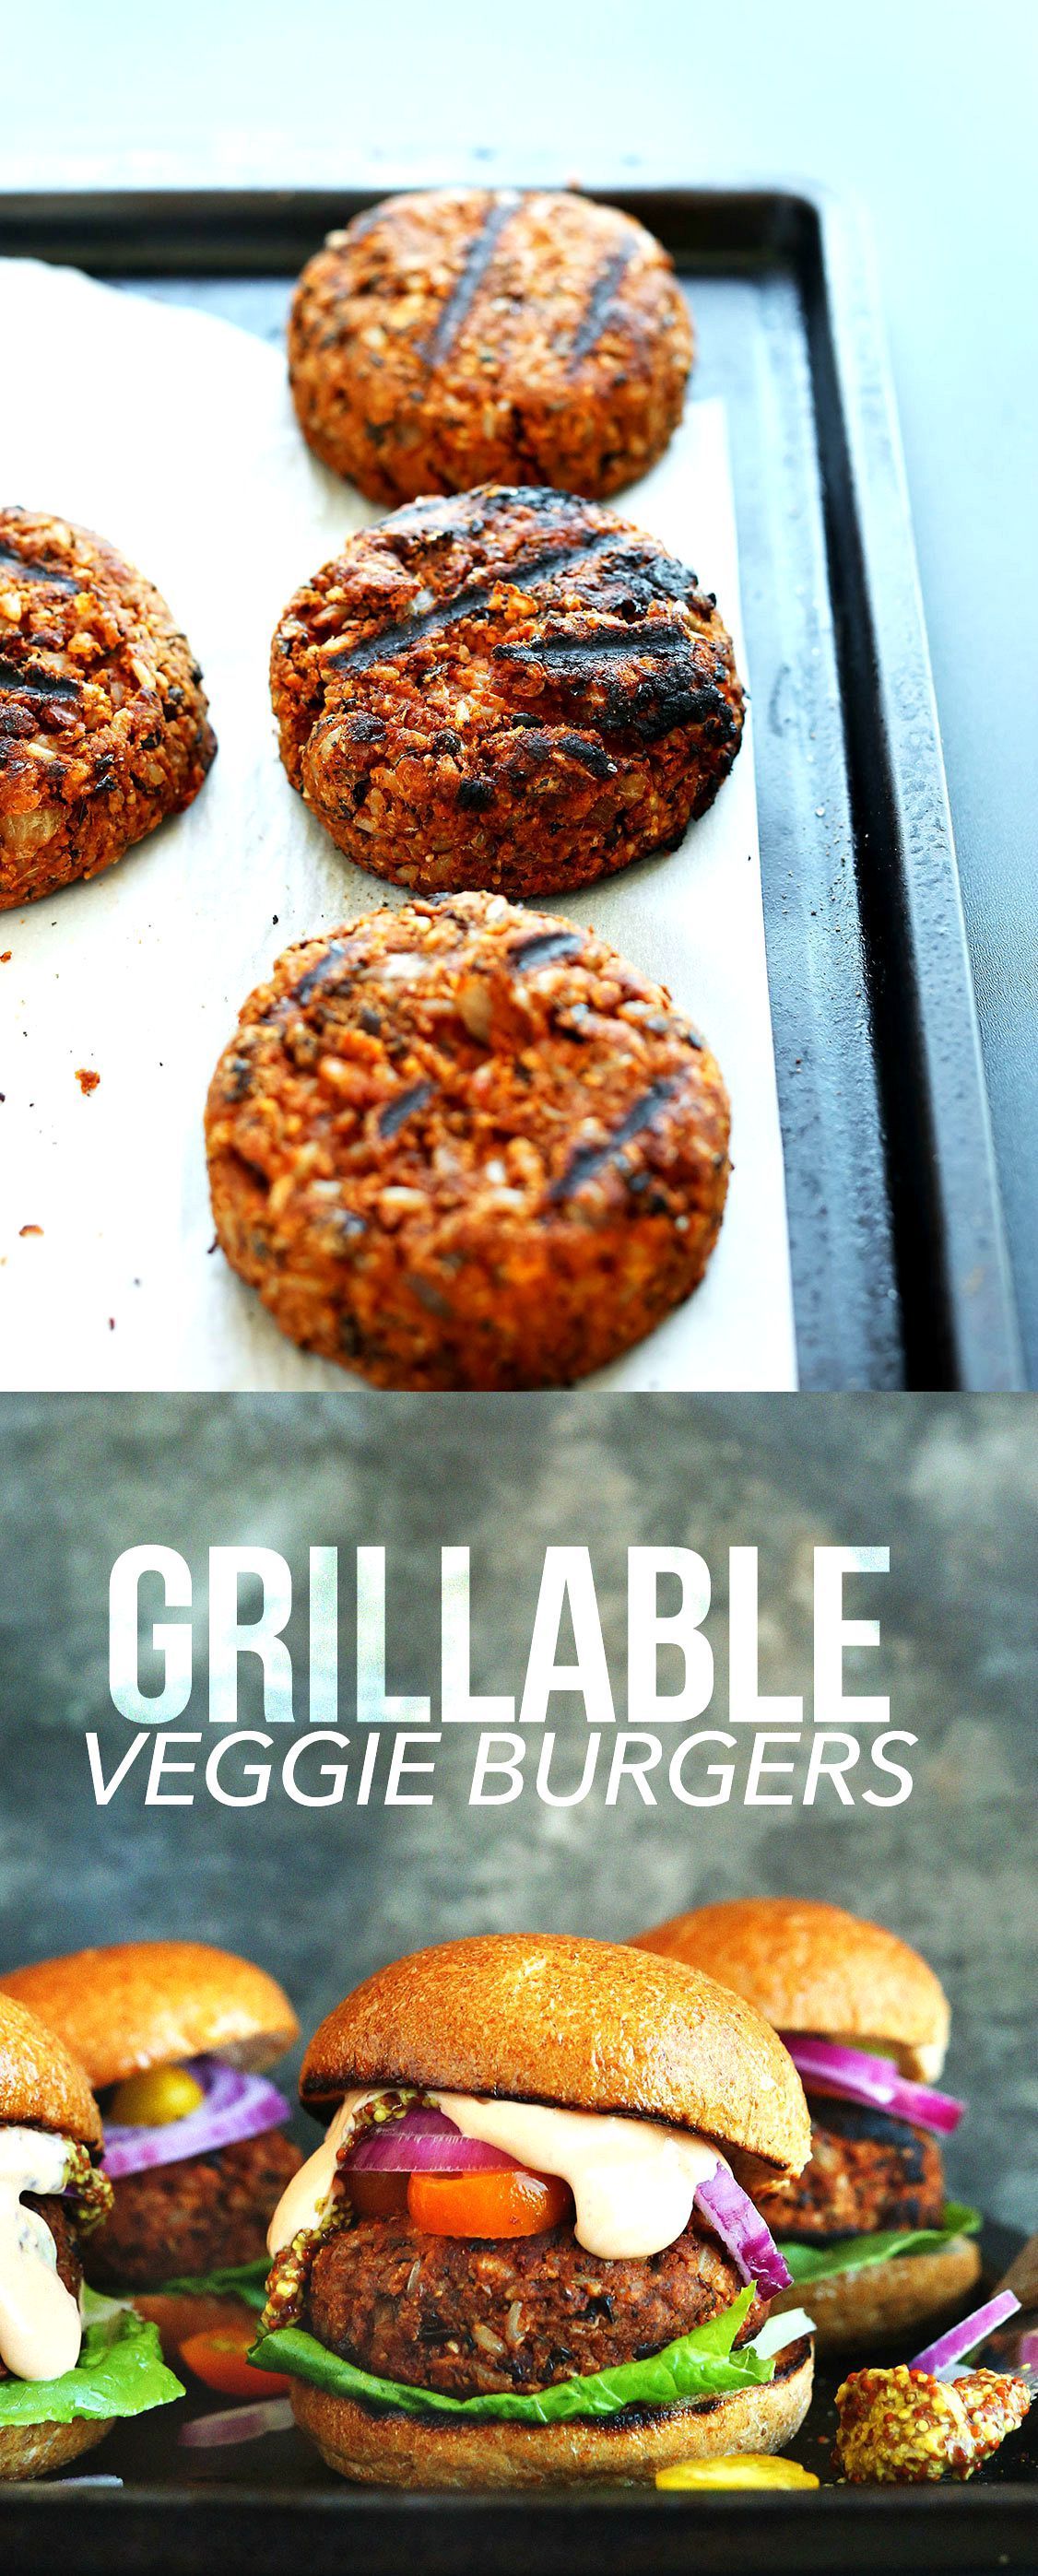 AMAZING Grillable Veggie Burgers with fluffy brown rice, black beans, walnuts and spices